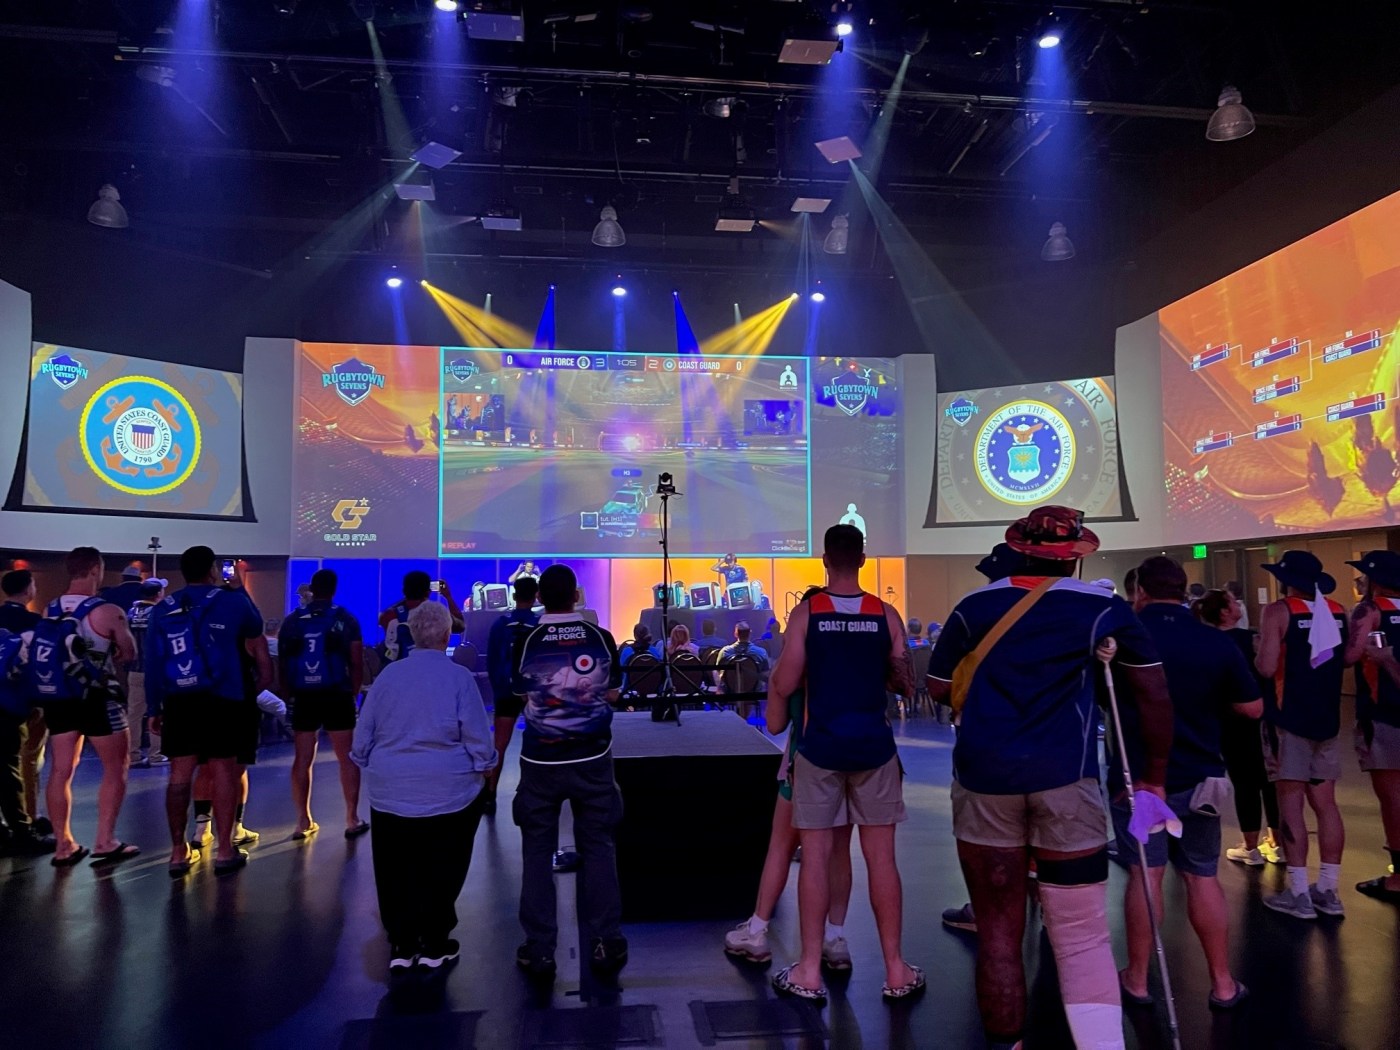 In 2021, the Warrior GMR Foundation staged its first event, with five teams representing branches of the U.S. military competing in Glendale, Colorado in an esports championship.